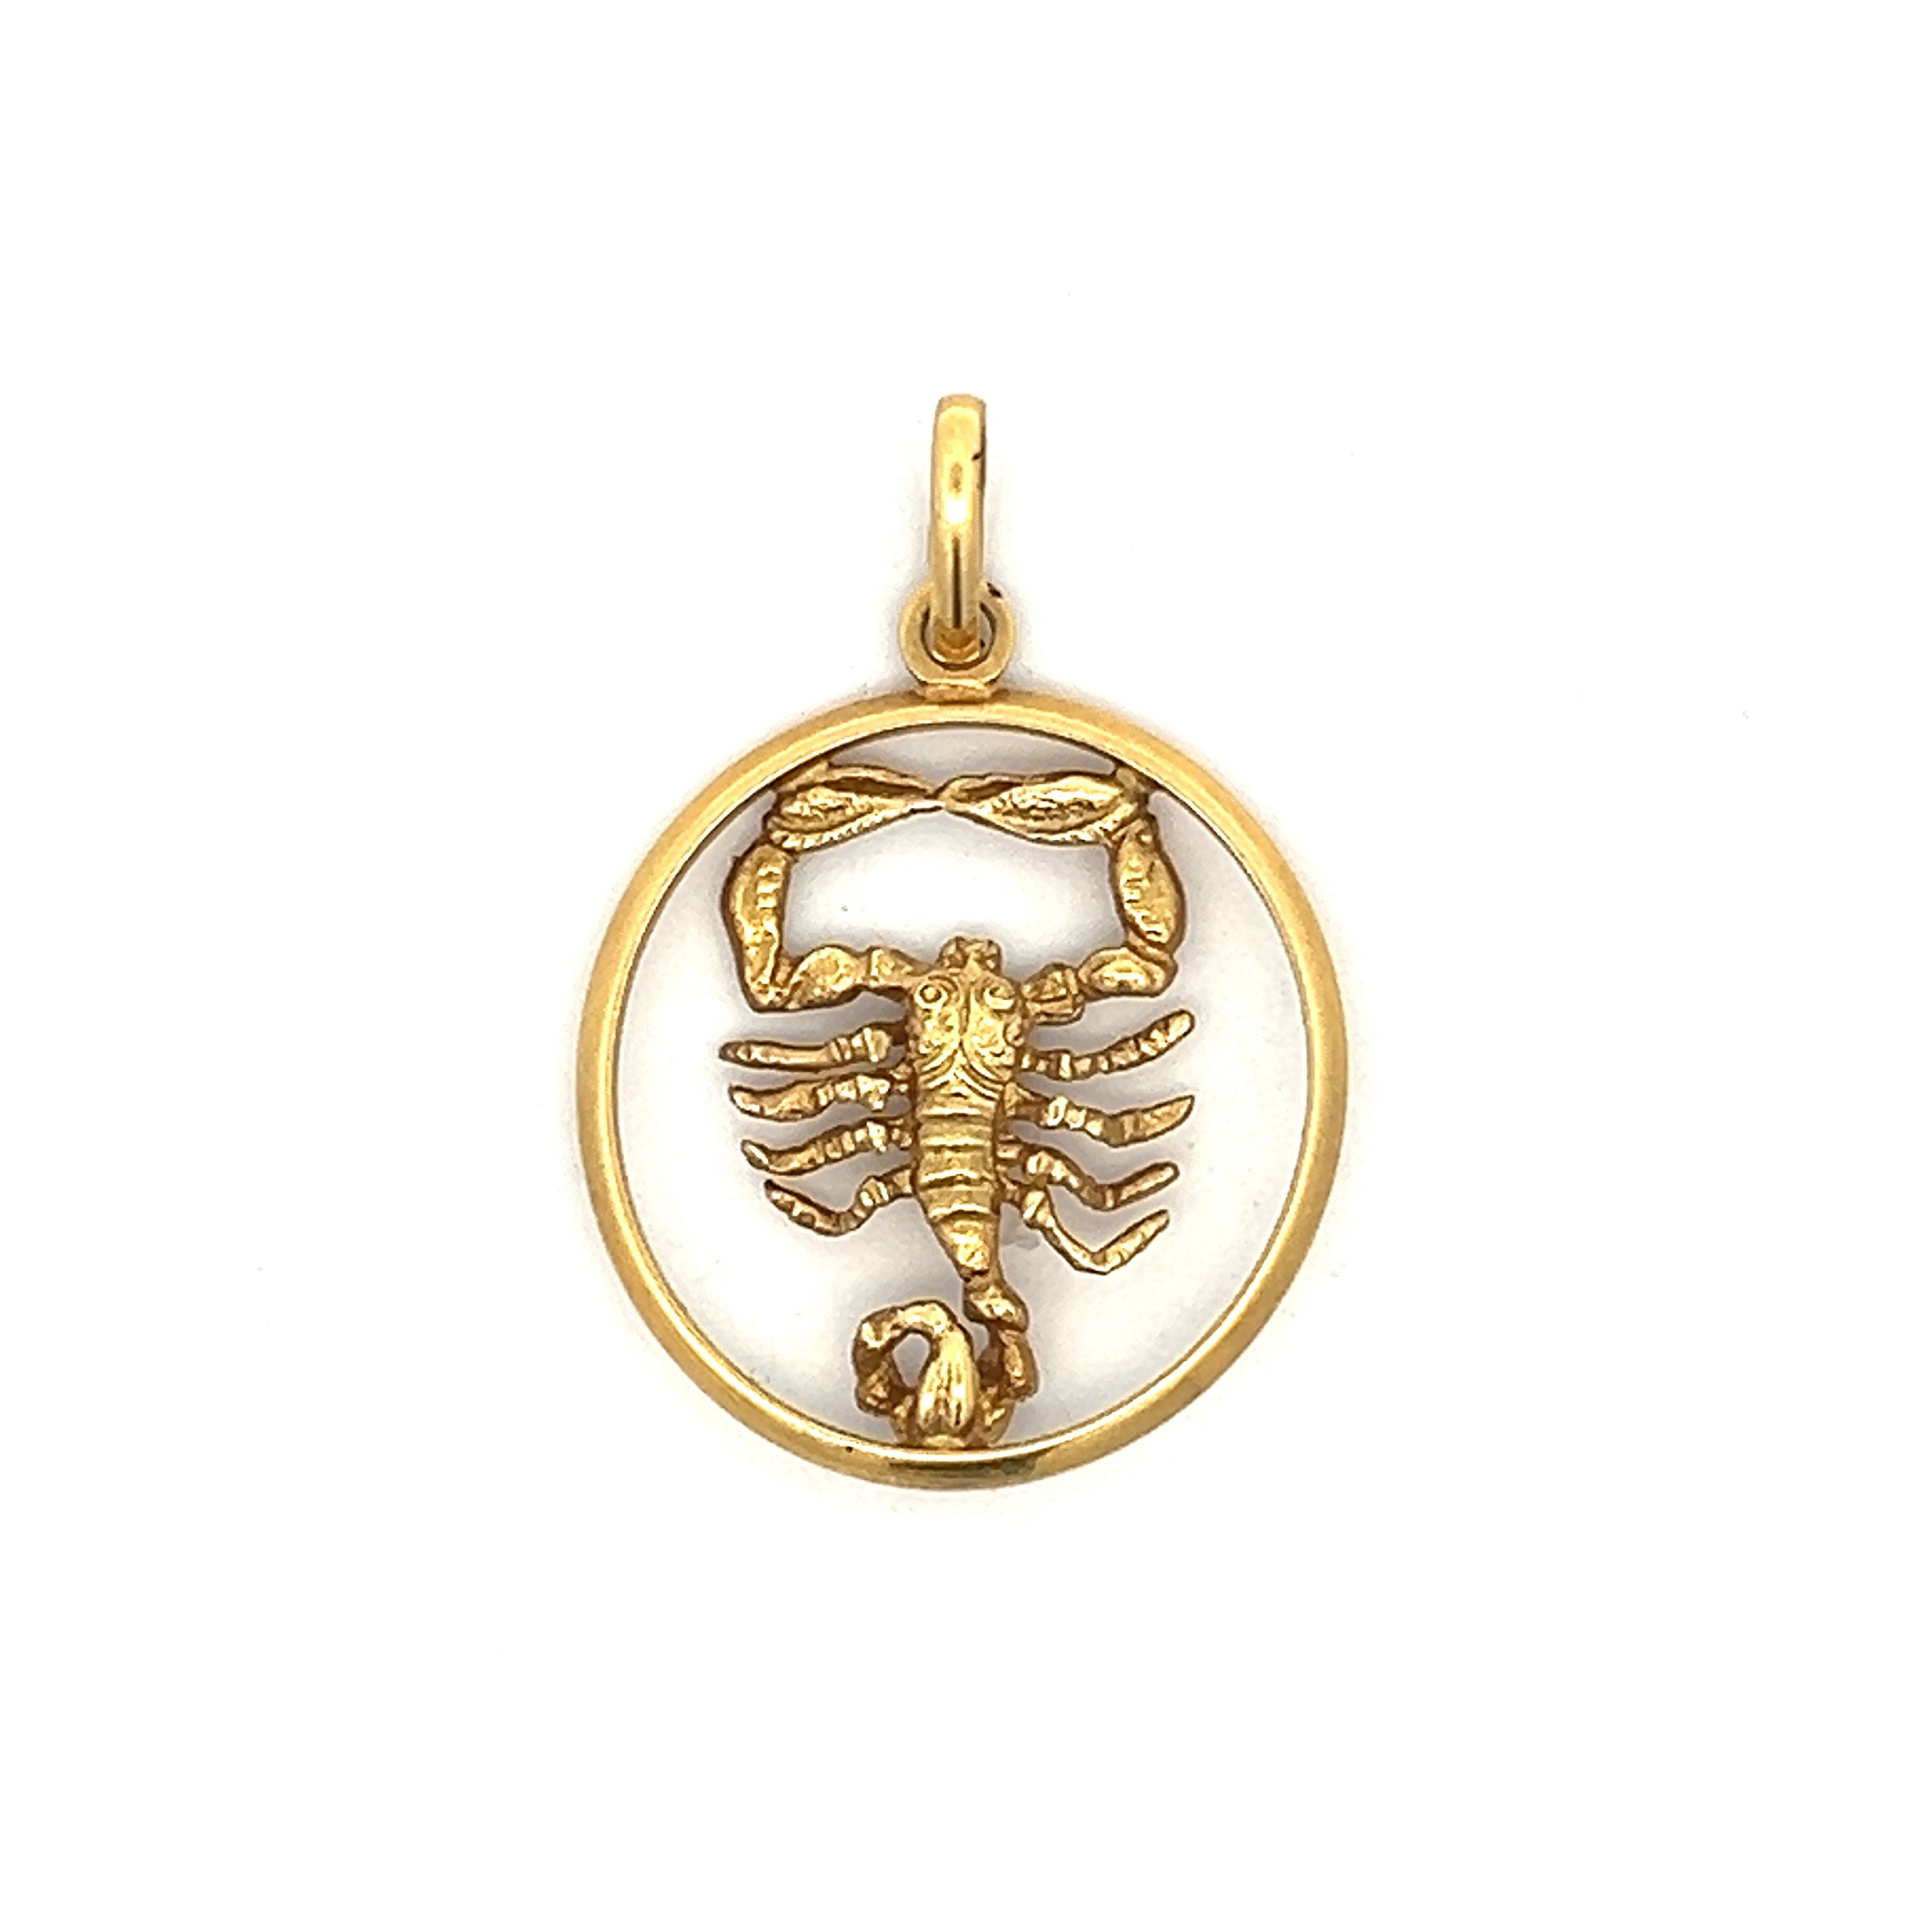 Buy Gold Scorpio Necklace Scorpion Pendant Zodiac Medallion Charm Amulet  Talisman Star Sign Coin Jewelry Astrology Gift for Daughter Etsy Pick  Online in India - Etsy